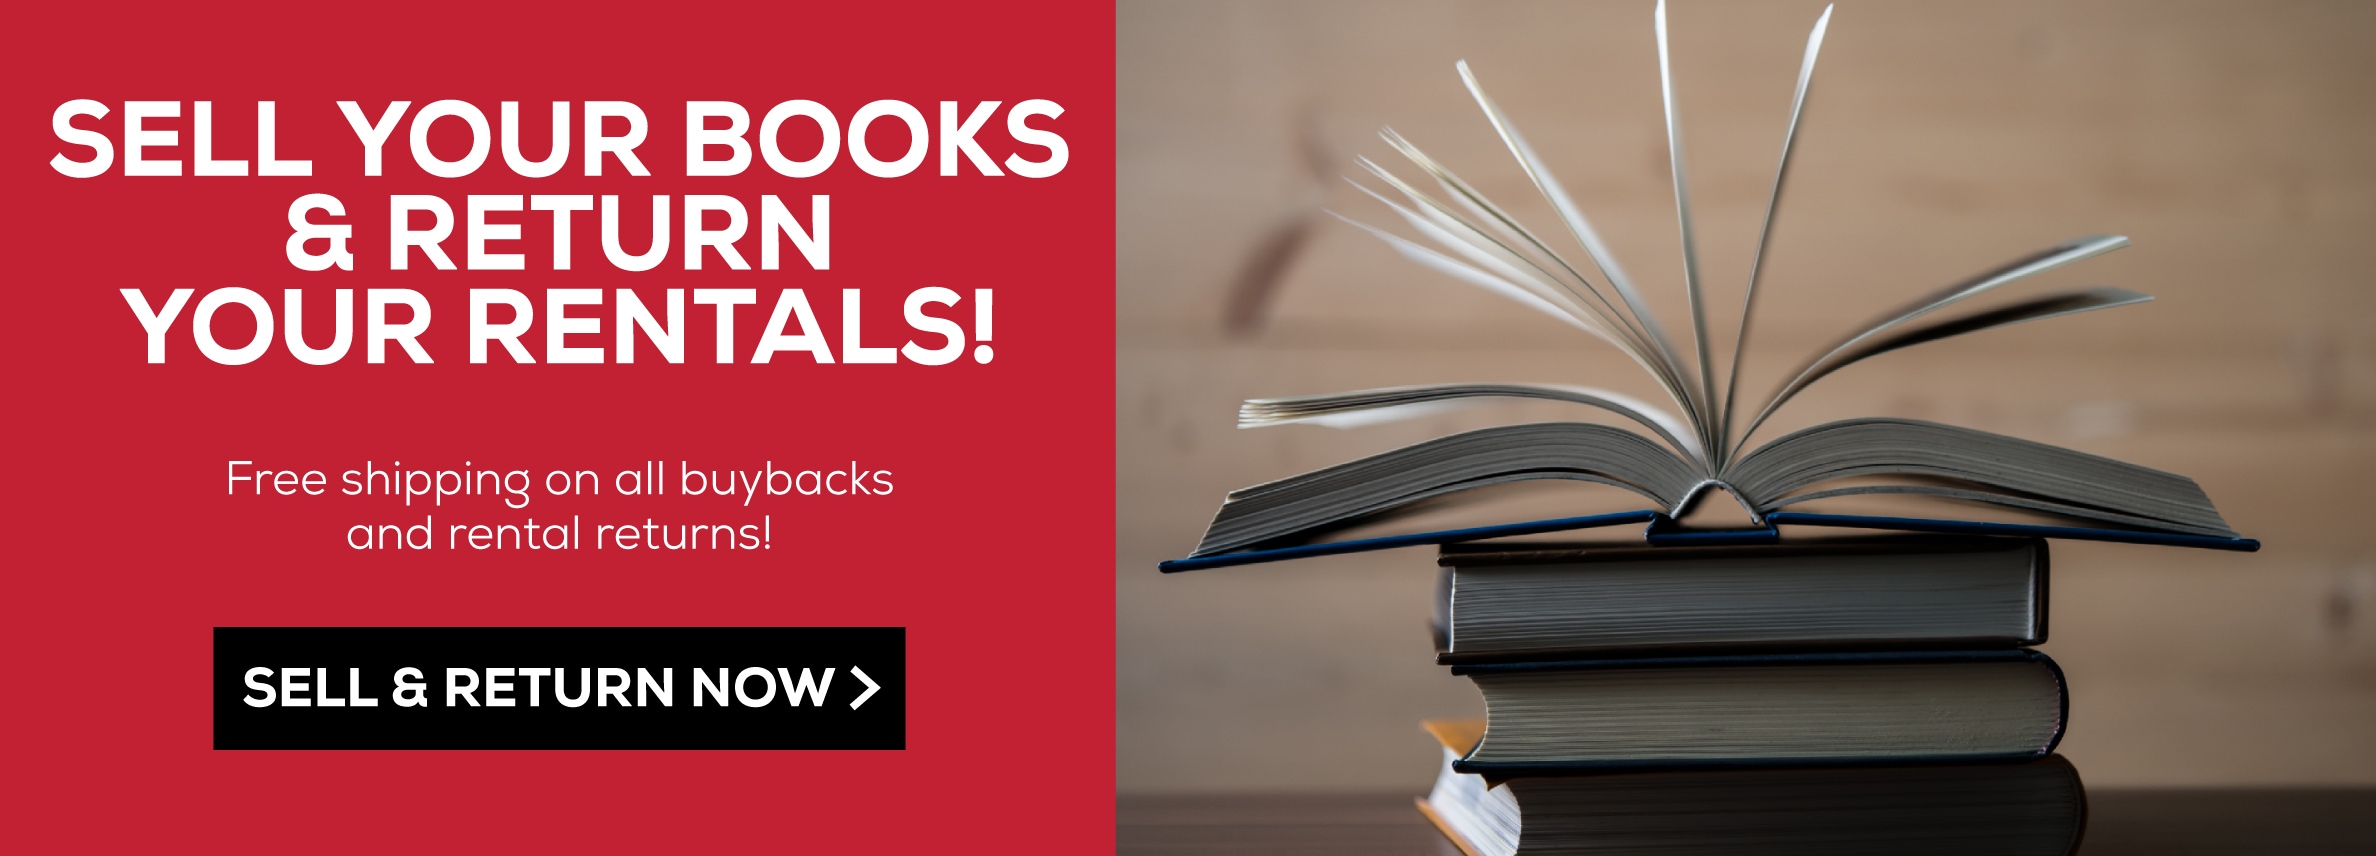 Sell your books and return your rentals! Free shipping on all buybacks and rental returns! Sell and return now.